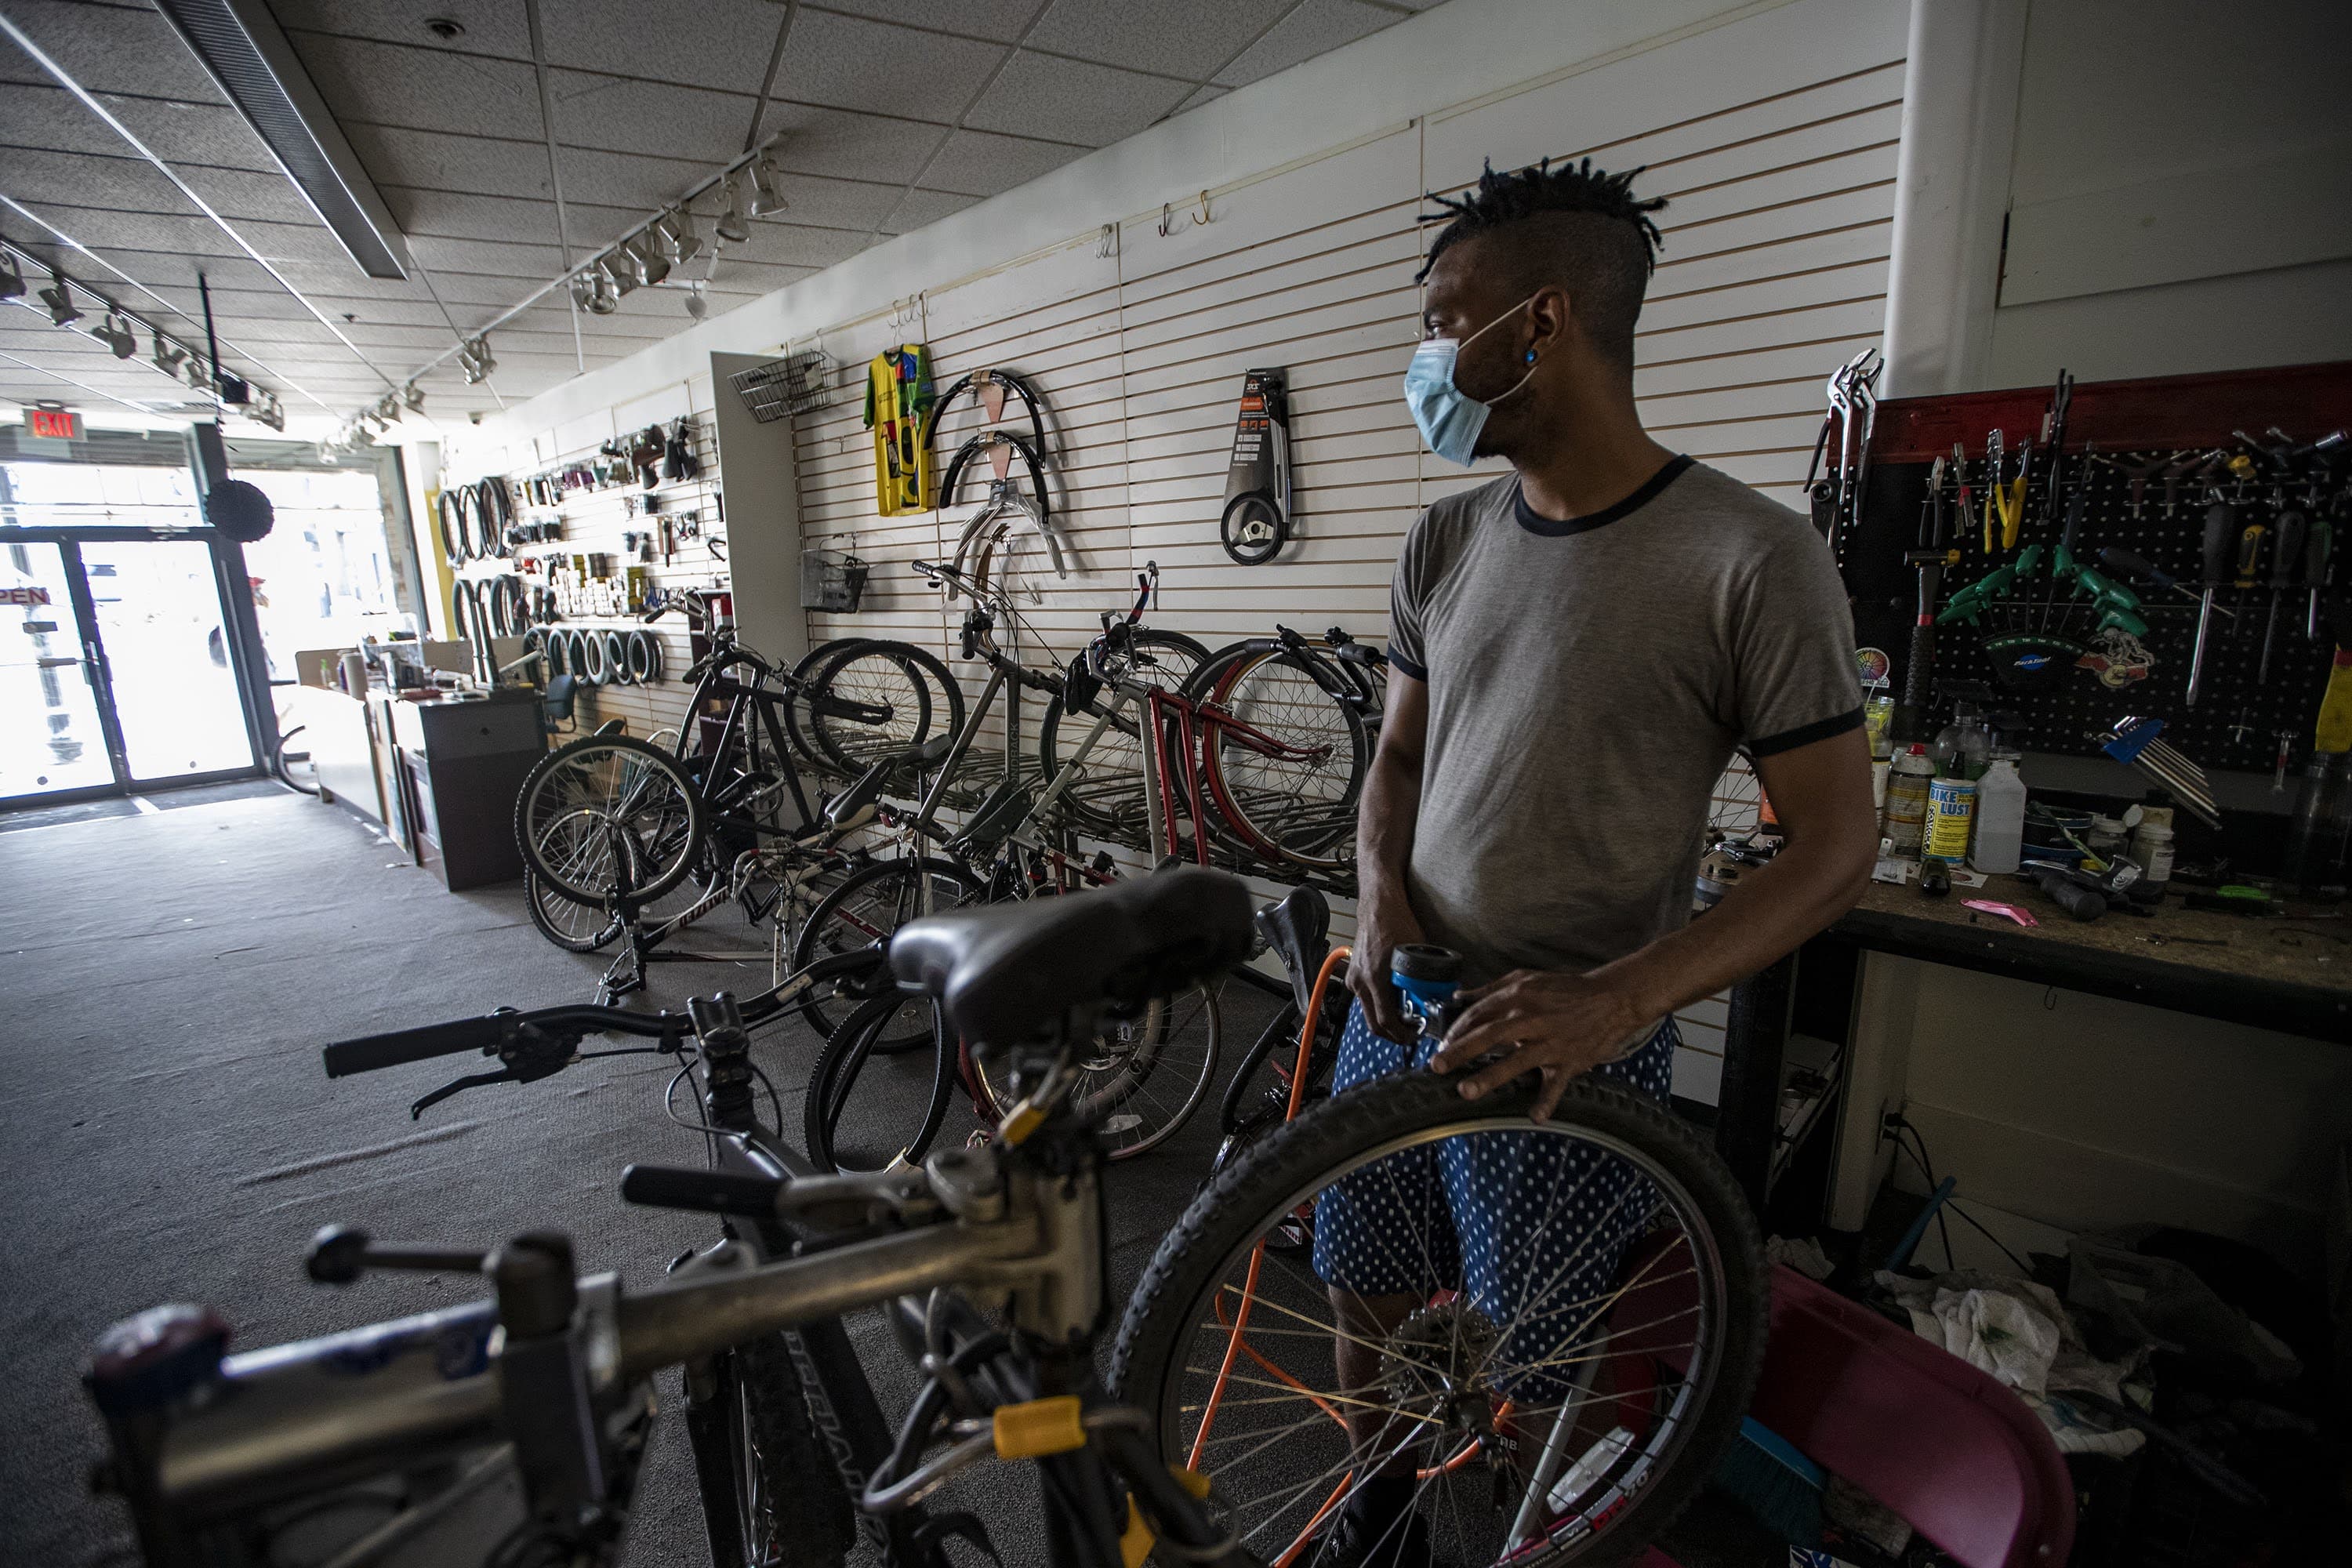 Noah Hicks looks out to the front of his bicycle shop, Spokehouse, while repairing a tire for a customer. (Jesse Costa/WBUR)